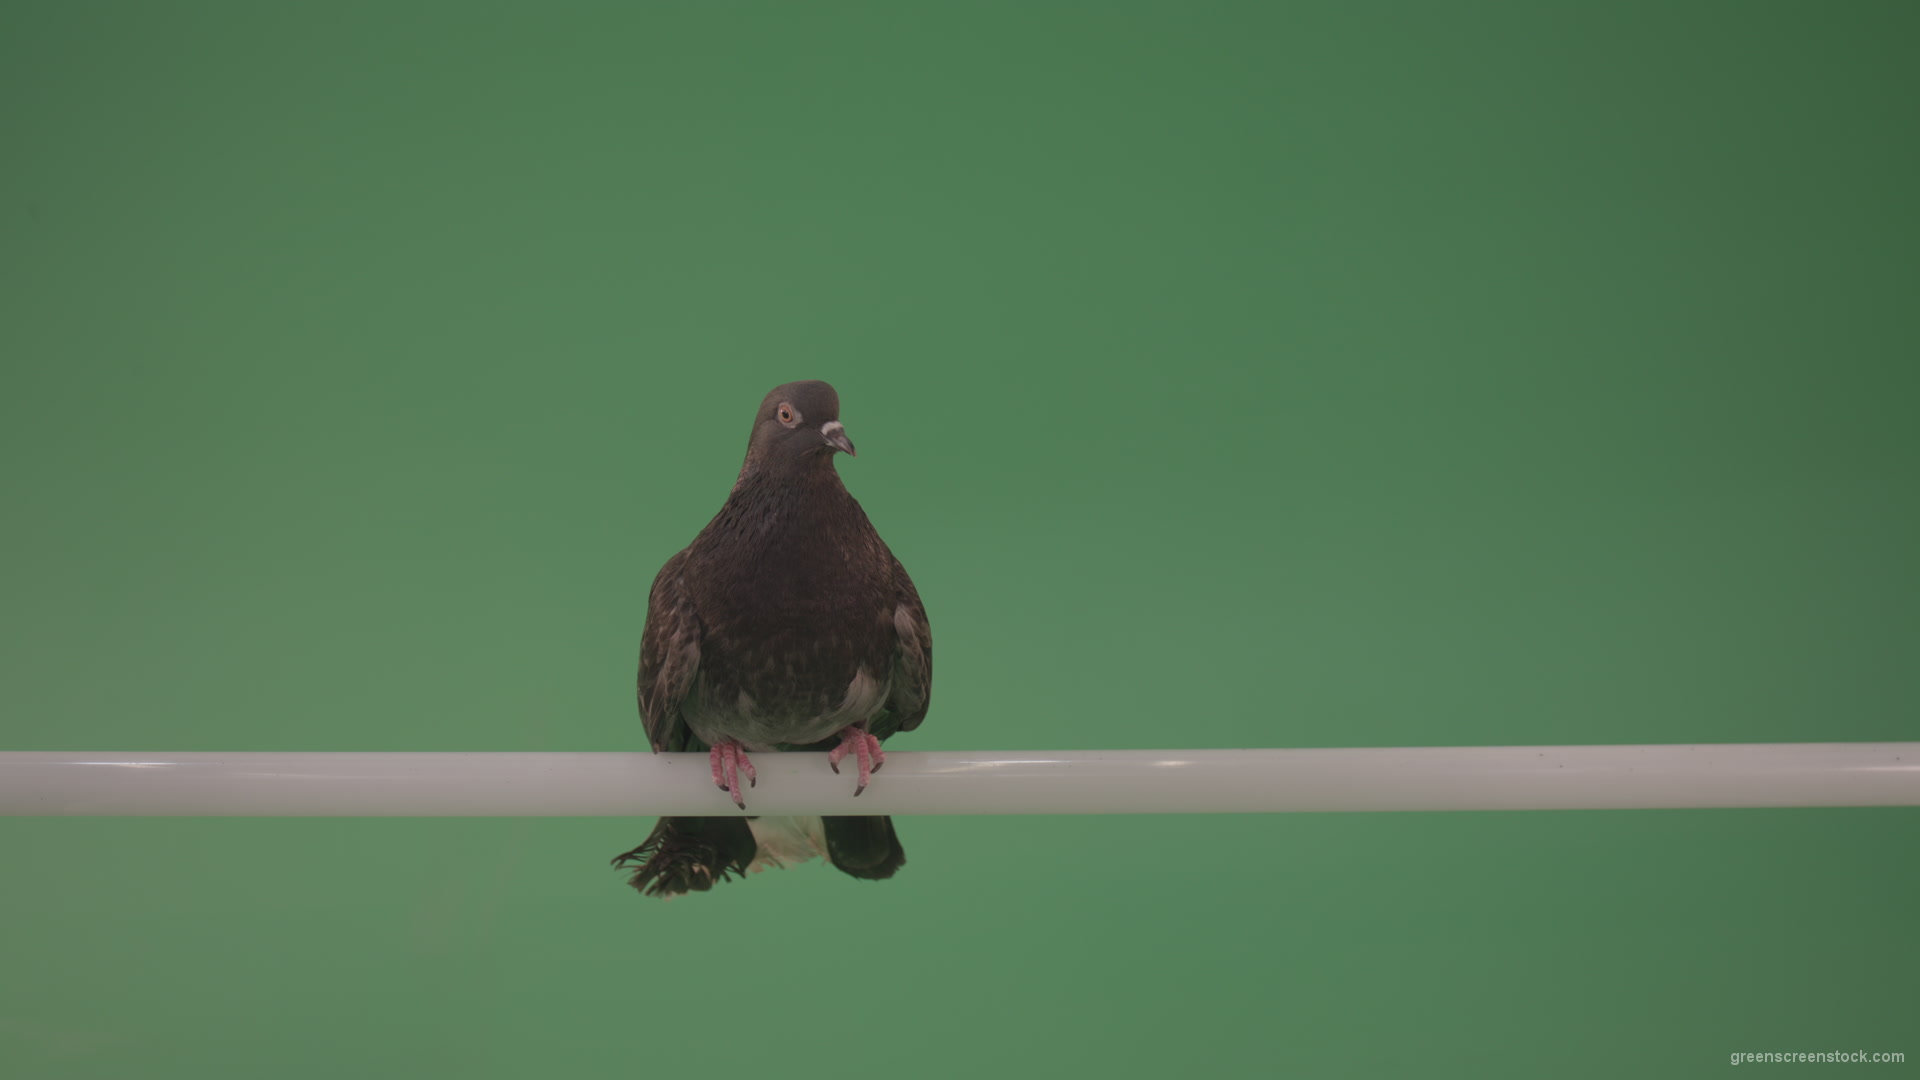 City-bird-of-a-dove-sitting-on-a-branch-in-the-city-isolated-on-green-background_008 Green Screen Stock